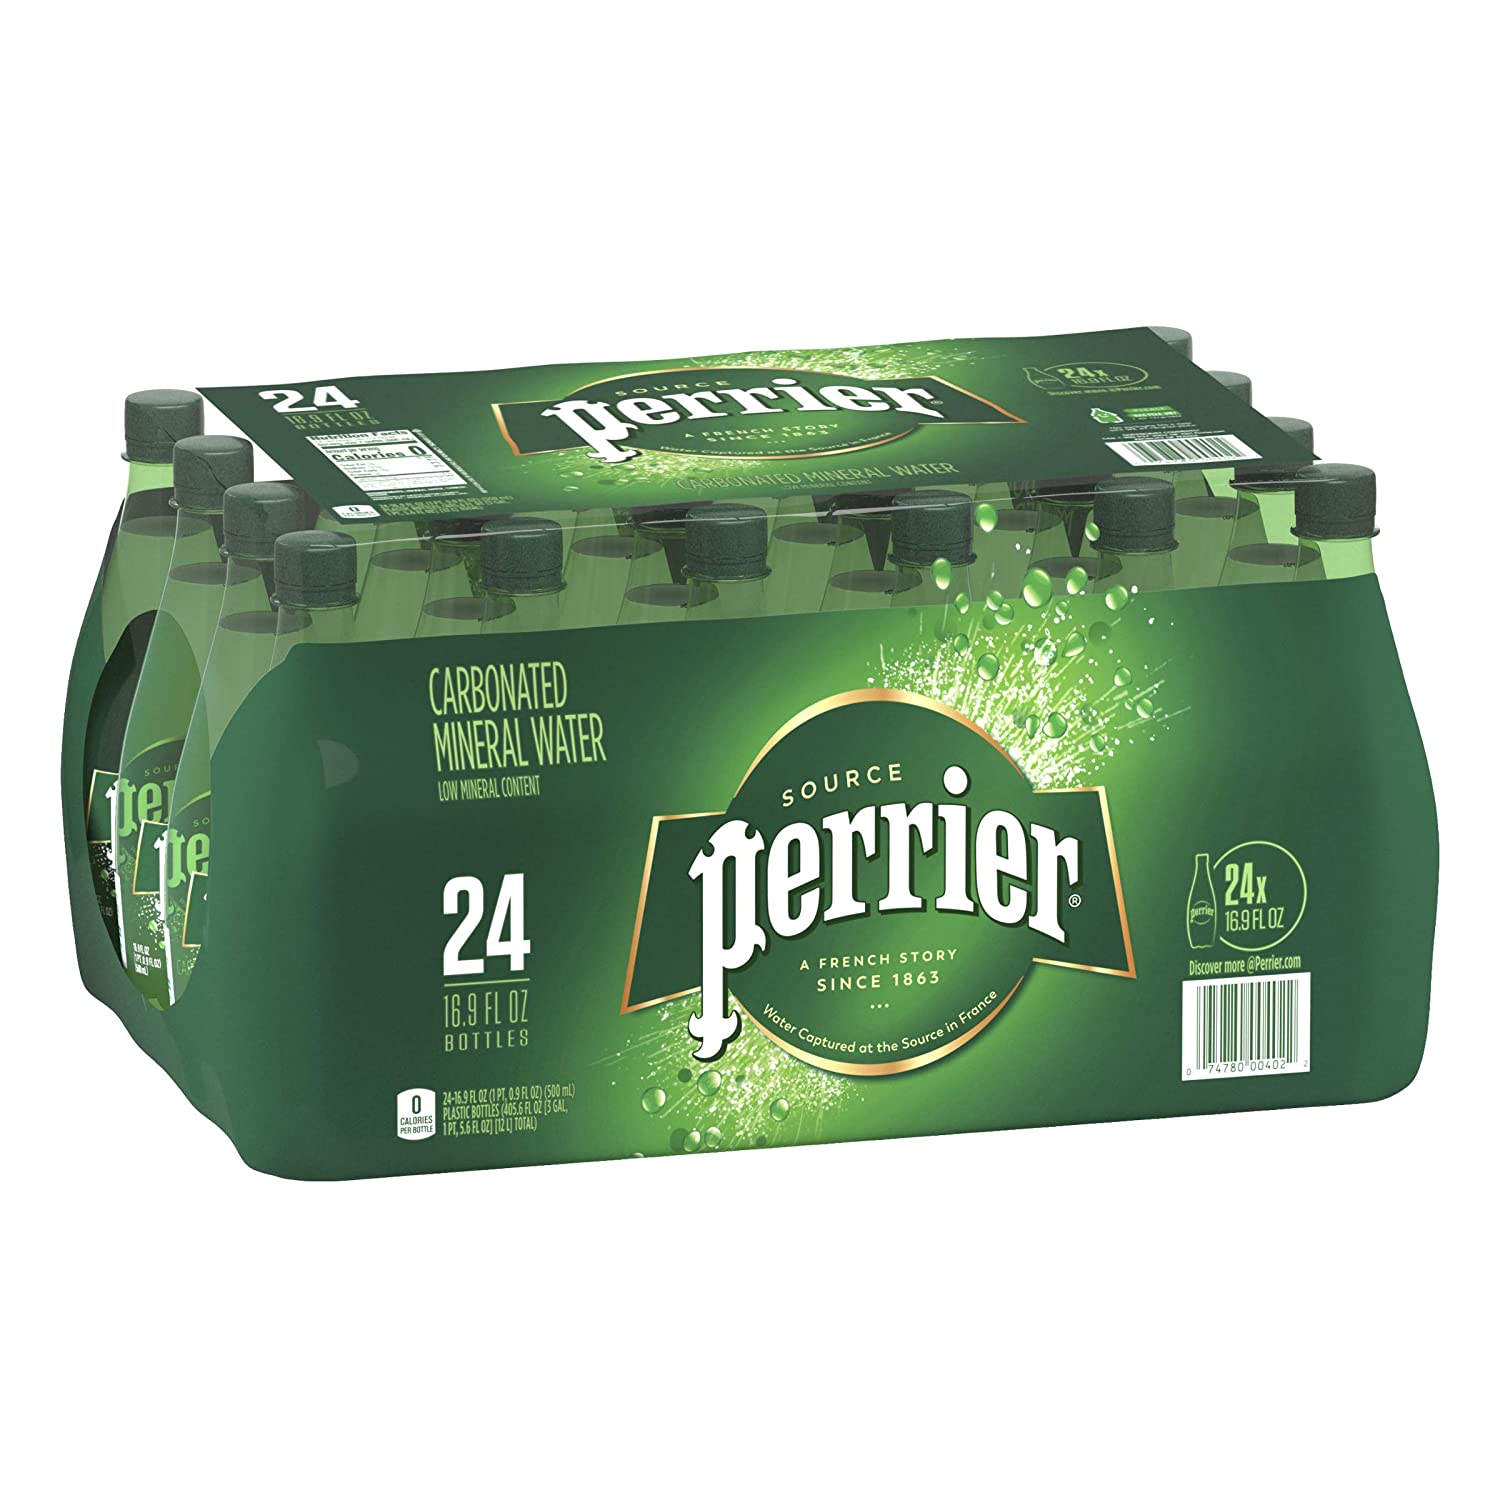 24-Pack 16.9oz Perrier Carbonated Mineral Water (Original) $13.98 at Amazon